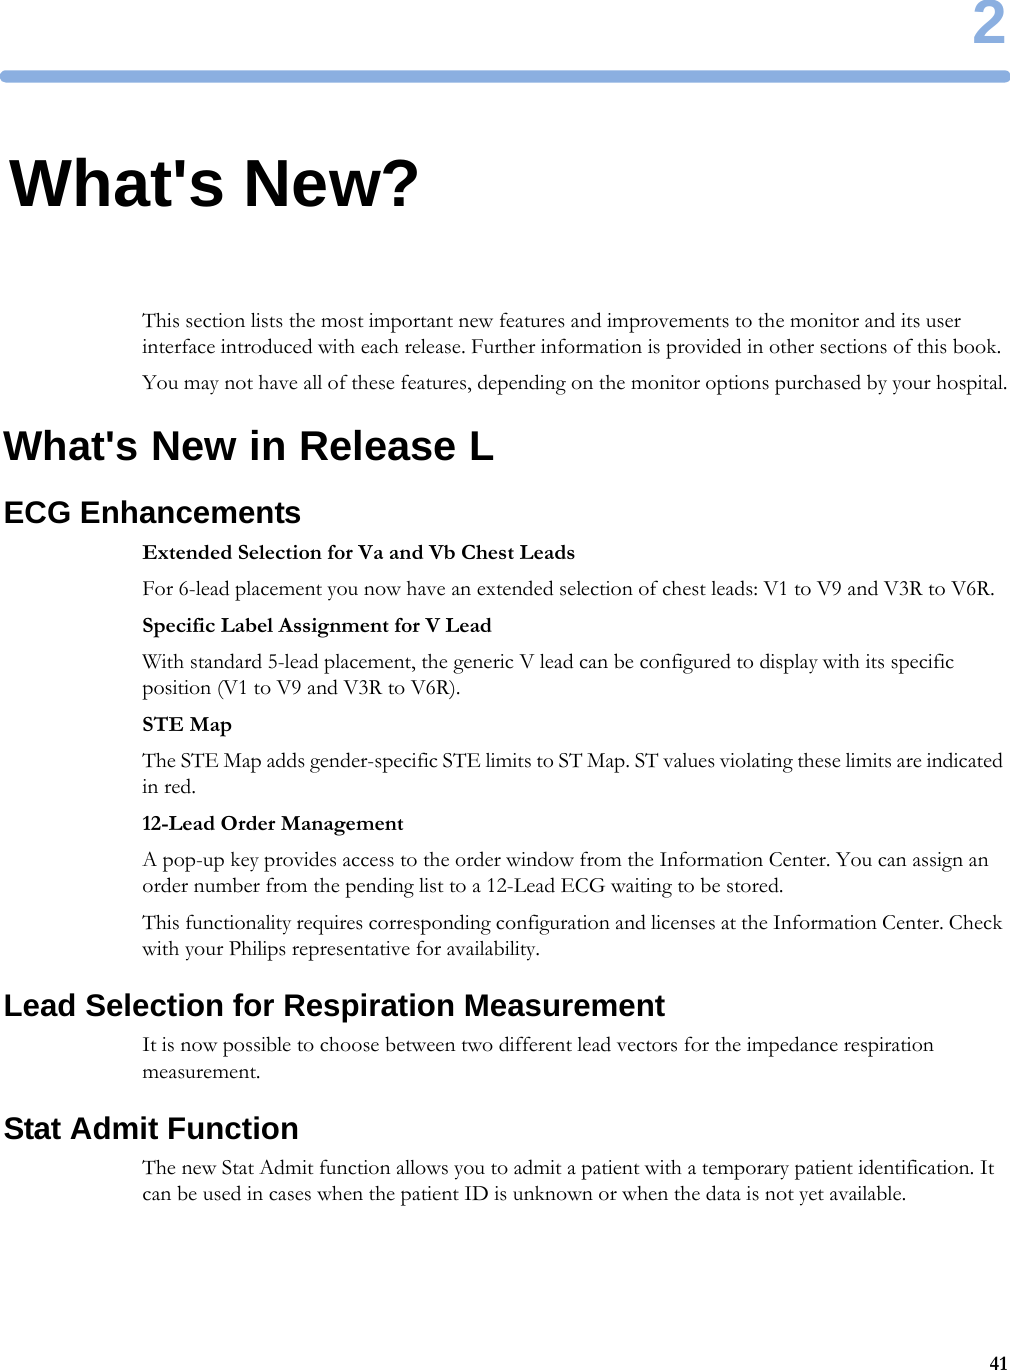 2412What&apos;s New?This section lists the most important new features and improvements to the monitor and its user interface introduced with each release. Further information is provided in other sections of this book.You may not have all of these features, depending on the monitor options purchased by your hospital.What&apos;s New in Release LECG EnhancementsExtended Selection for Va and Vb Chest LeadsFor 6-lead placement you now have an extended selection of chest leads: V1 to V9 and V3R to V6R.Specific Label Assignment for V LeadWith standard 5-lead placement, the generic V lead can be configured to display with its specific position (V1 to V9 and V3R to V6R).STE MapThe STE Map adds gender-specific STE limits to ST Map. ST values violating these limits are indicated in red.12-Lead Order ManagementA pop-up key provides access to the order window from the Information Center. You can assign an order number from the pending list to a 12-Lead ECG waiting to be stored.This functionality requires corresponding configuration and licenses at the Information Center. Check with your Philips representative for availability.Lead Selection for Respiration MeasurementIt is now possible to choose between two different lead vectors for the impedance respiration measurement.Stat Admit FunctionThe new Stat Admit function allows you to admit a patient with a temporary patient identification. It can be used in cases when the patient ID is unknown or when the data is not yet available.